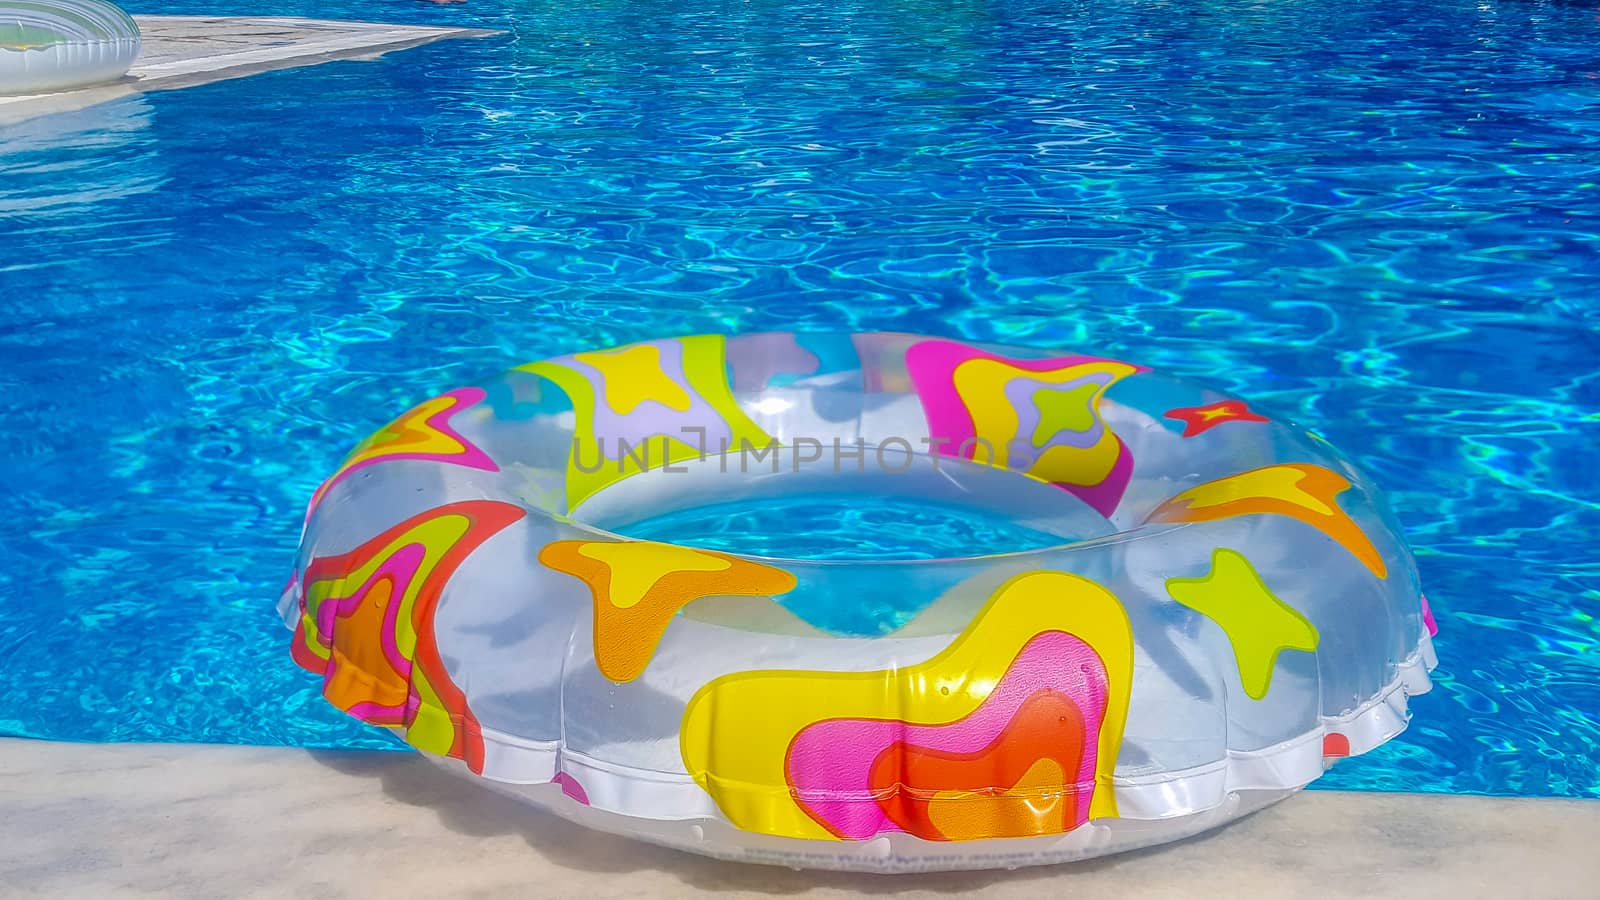 Rubber ring floating in a swimming pool by magicbones